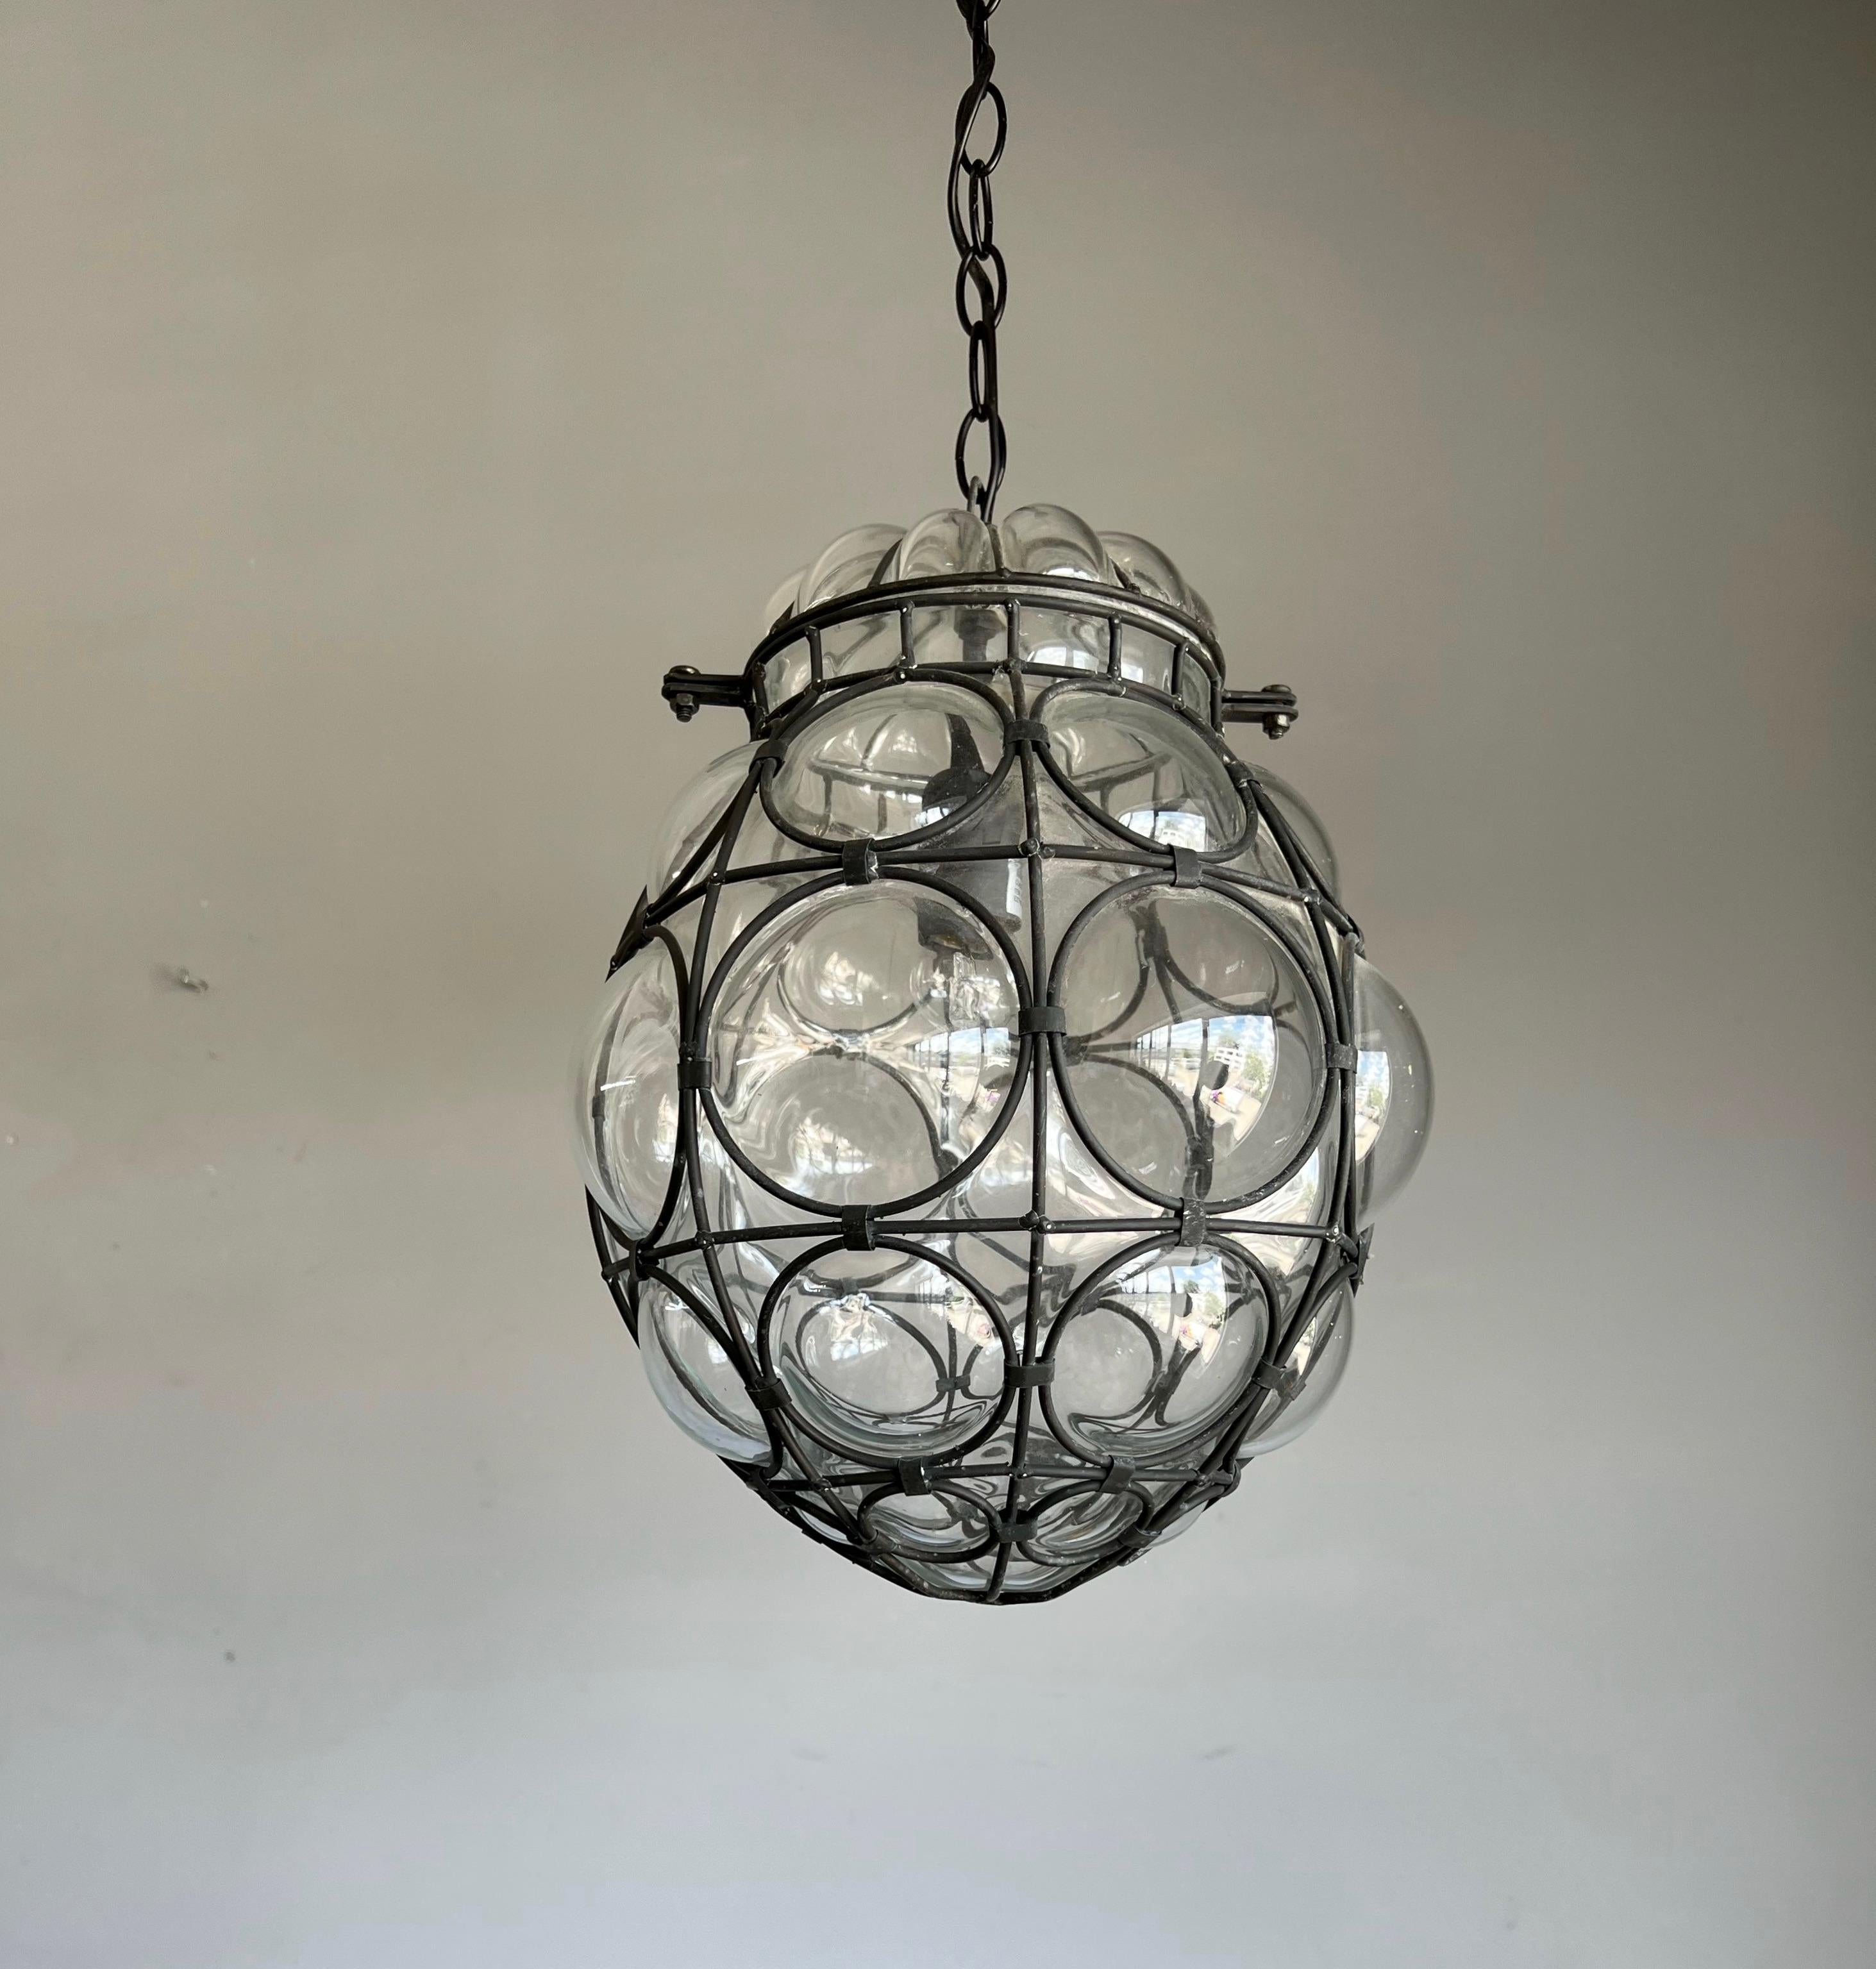 Mid-Century Modern Good Size Venetian Mouth Blown Glass in Hand-Crafted Metal Frame Pendant Light For Sale